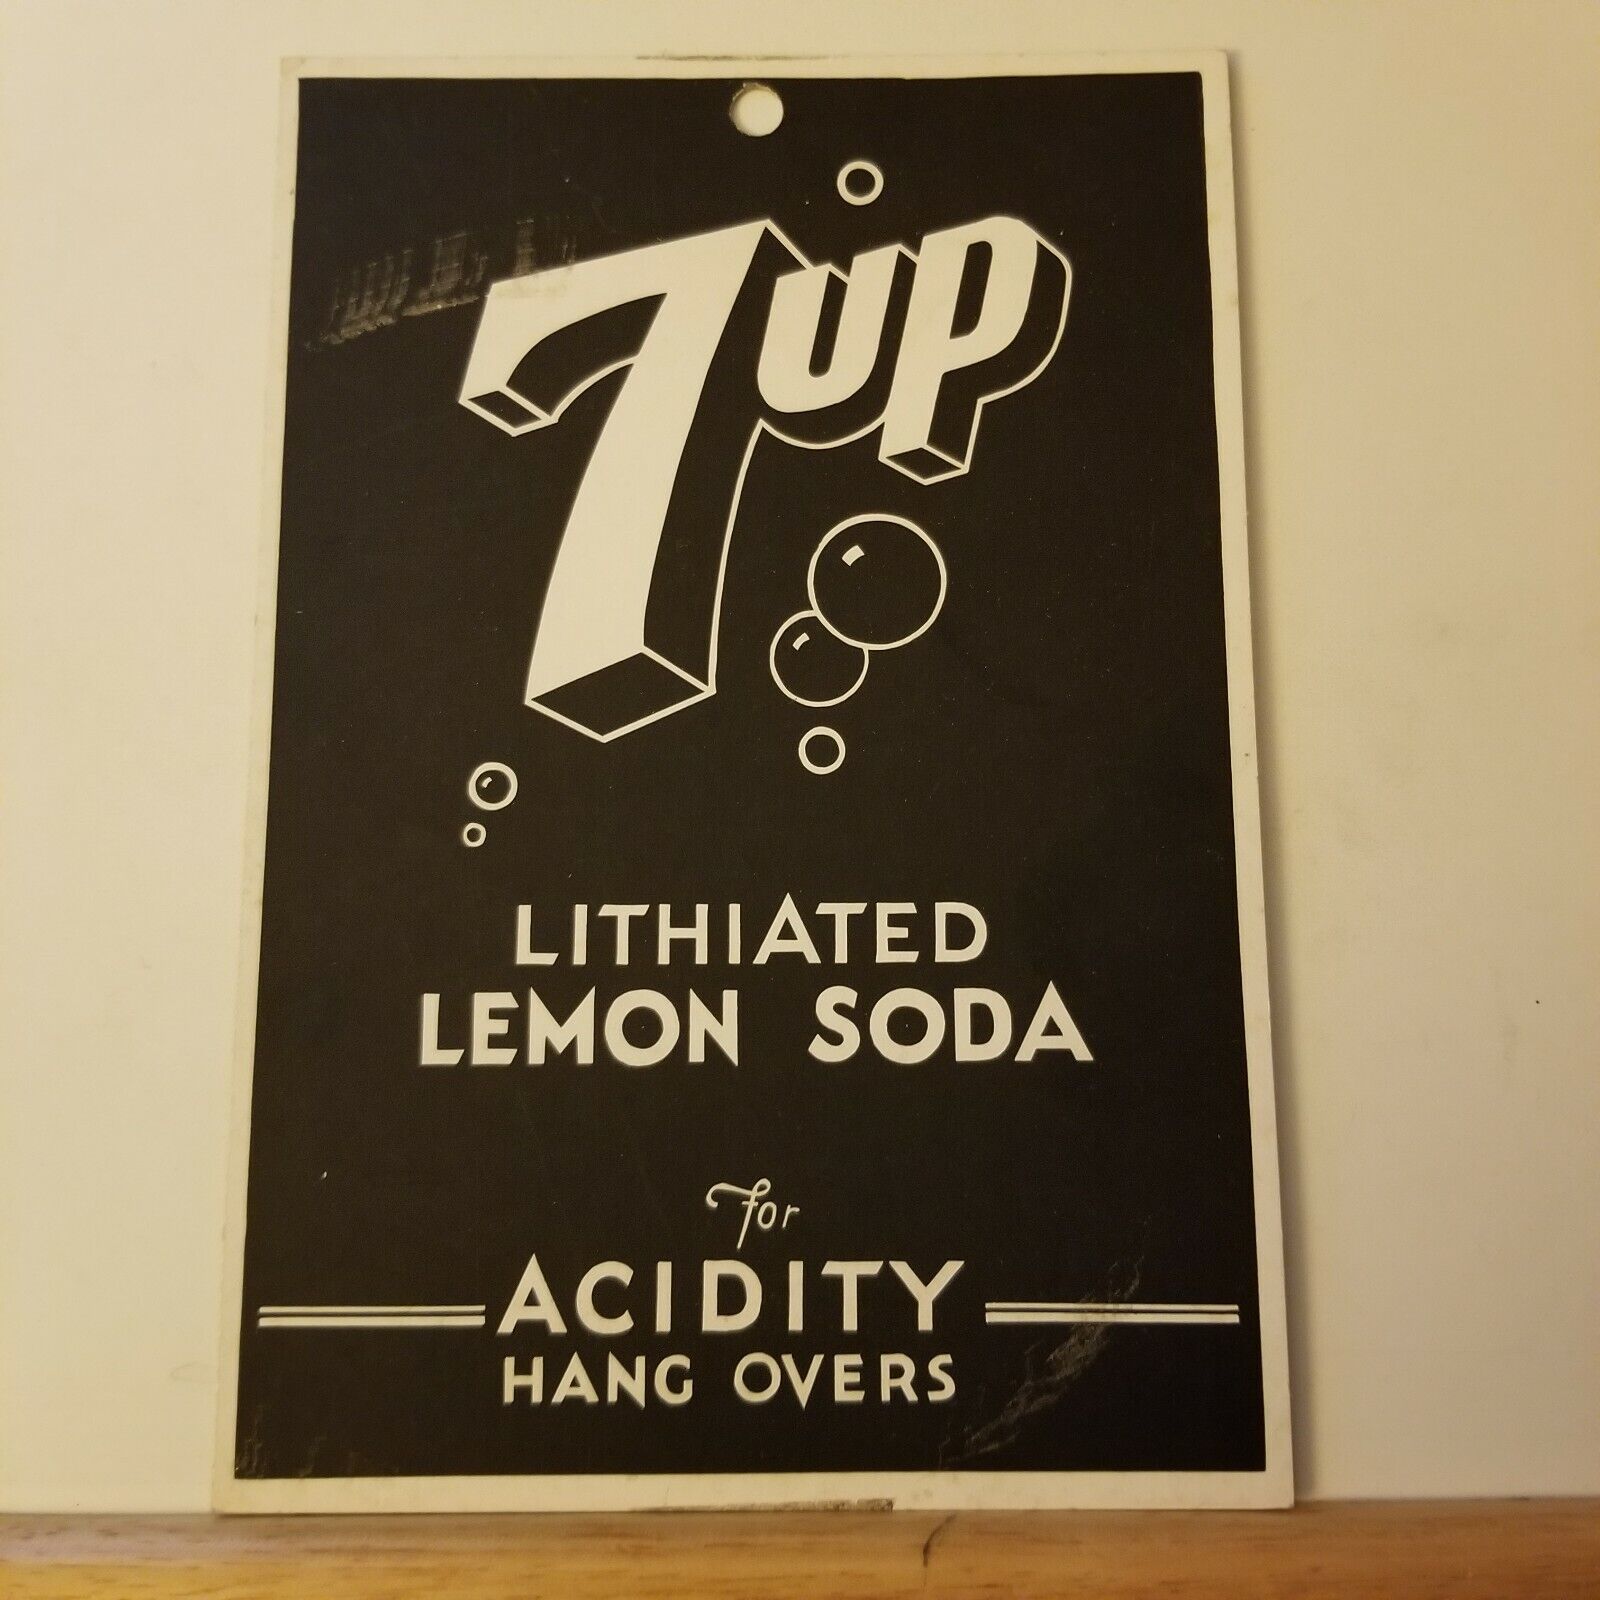 Super Rare 1930s 7up hanging sign lithiated lemon soda acidity hang overs 